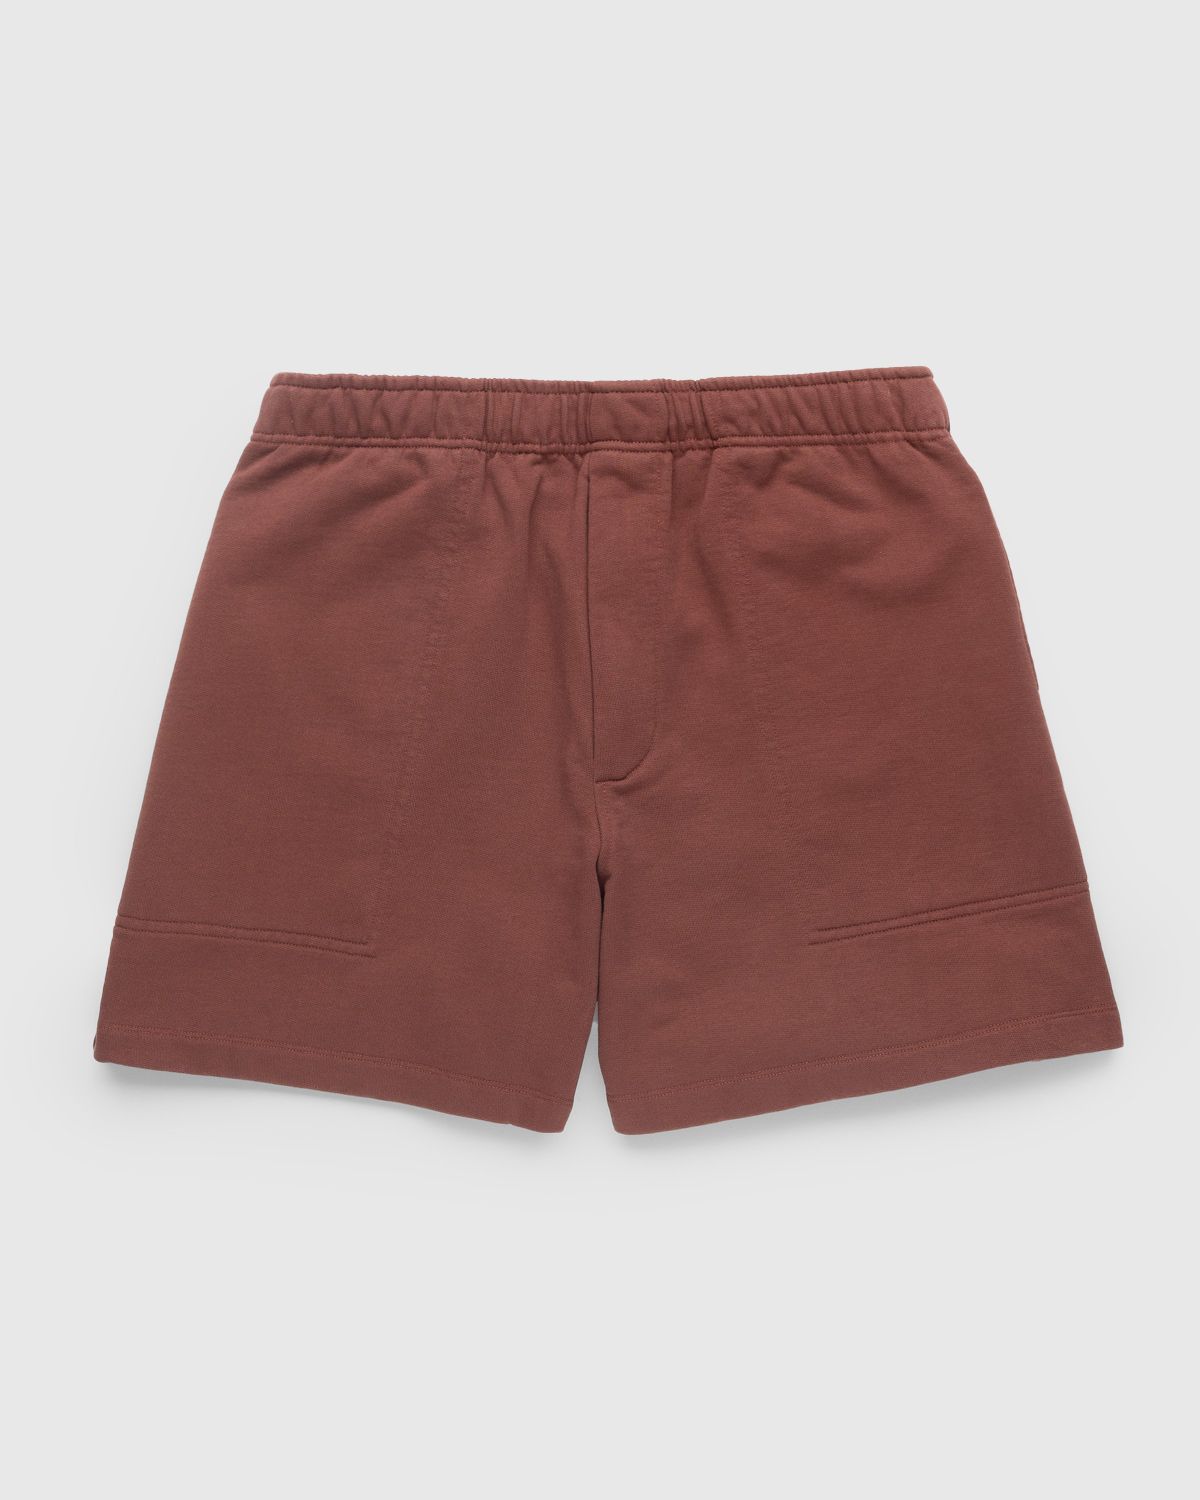 Bode – French Terry Sweat Shorts Brown | Highsnobiety Shop